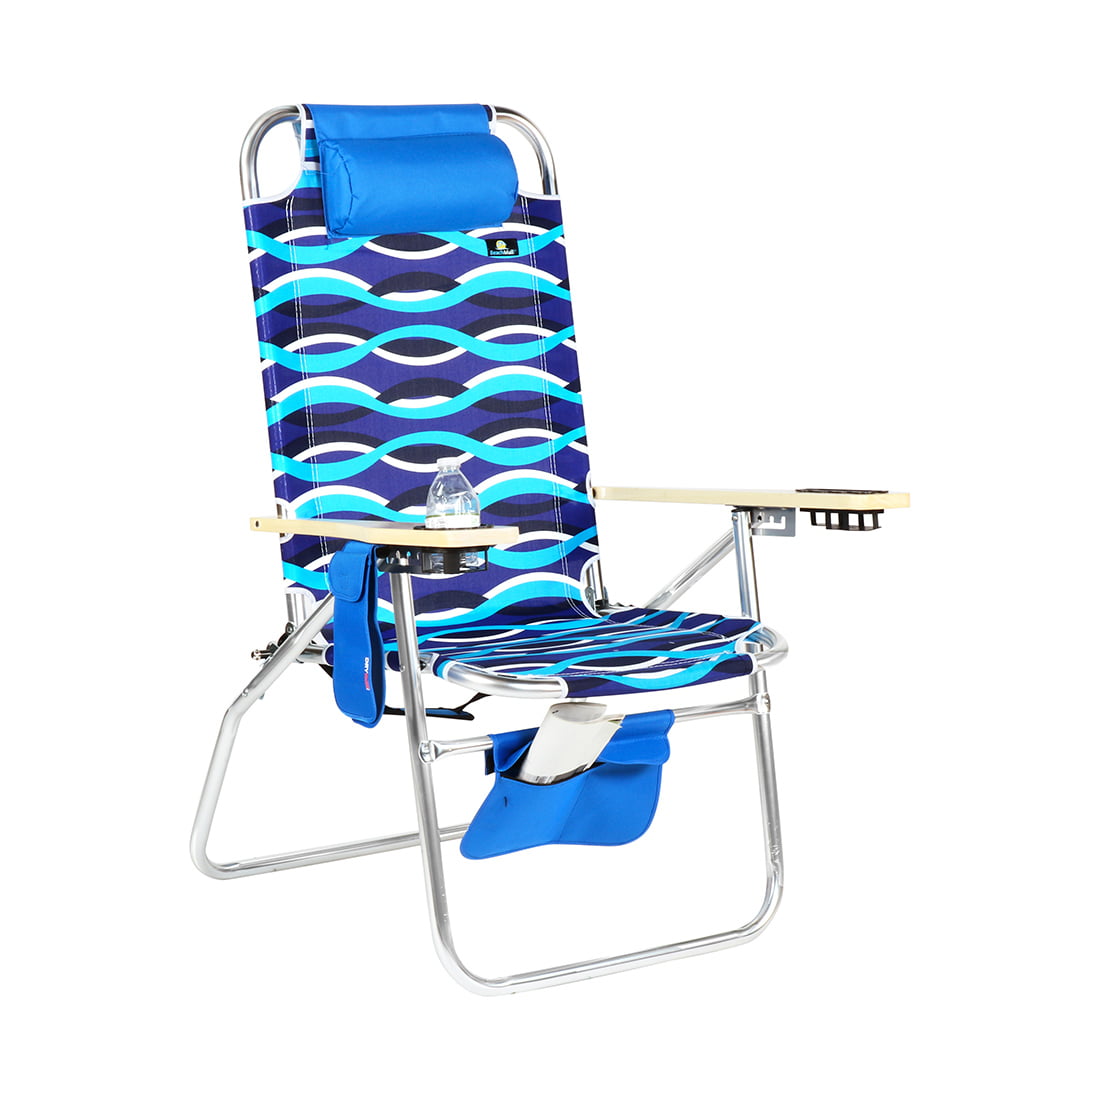 Creatice Best Beach Chair 300 Lb Capacity for Large Space